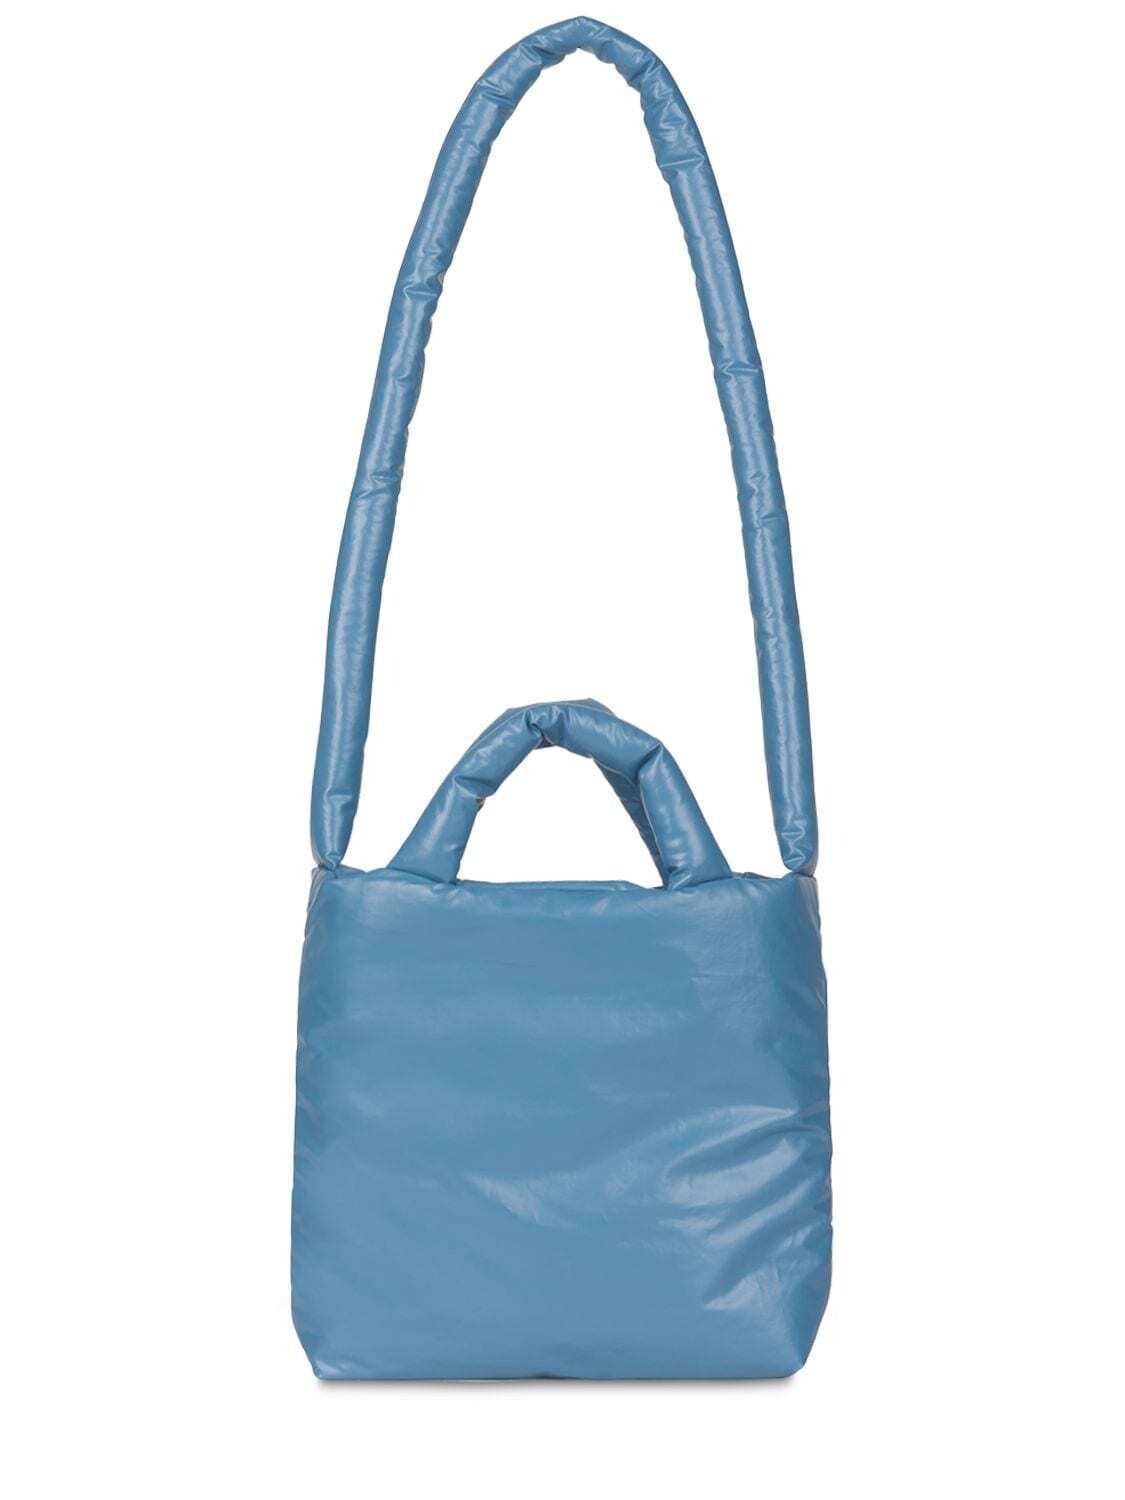 KASSL EDITIONS Small Pillow Oil Tote Bag in blue